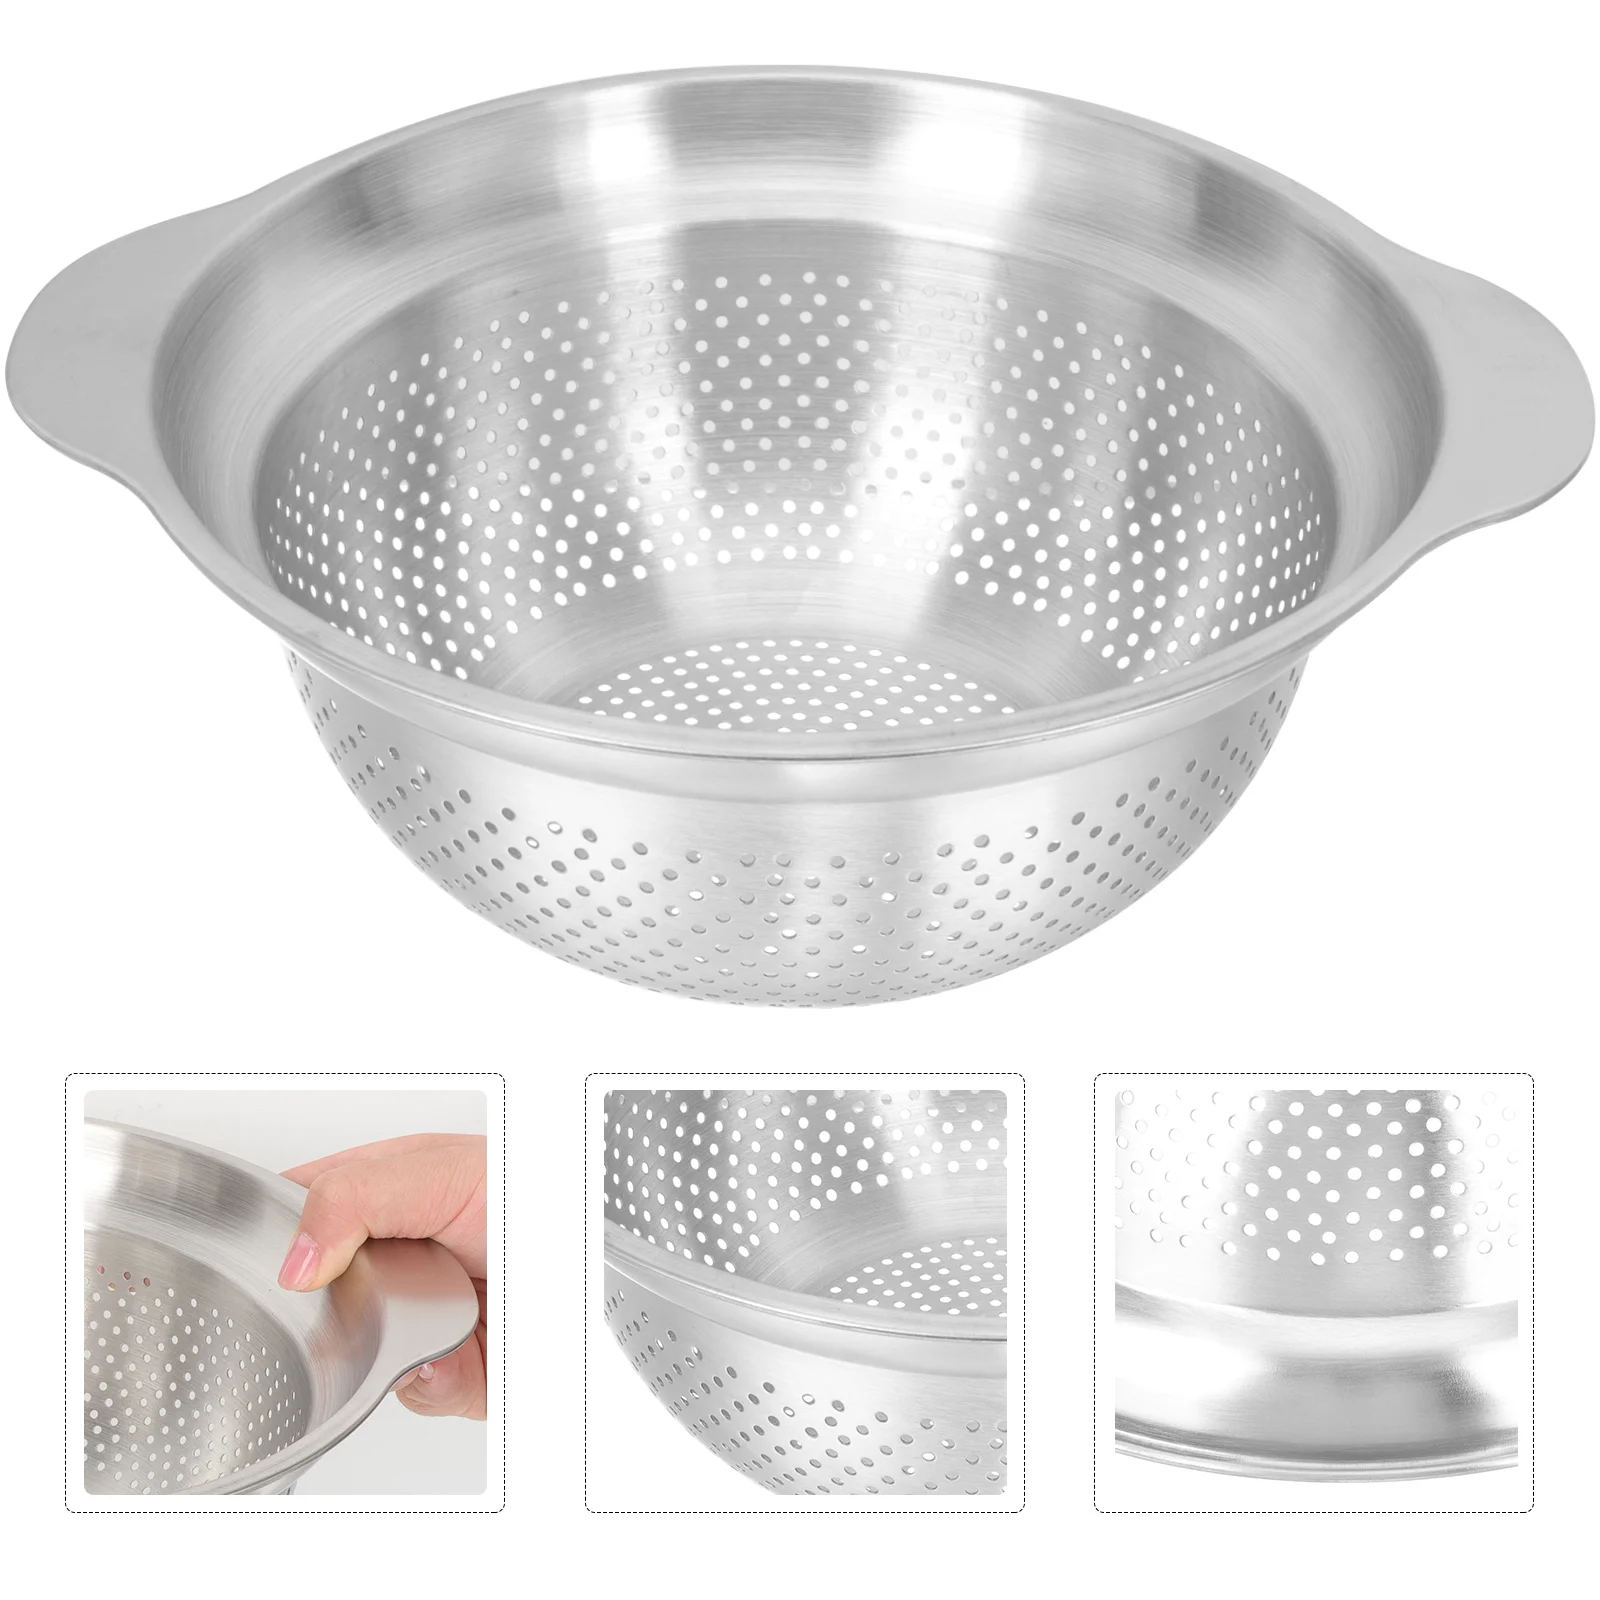 

Pasta Drainer Rice Colander Kitchen Strainers And Colanders Strainer Basket for Cooking Stainless steel